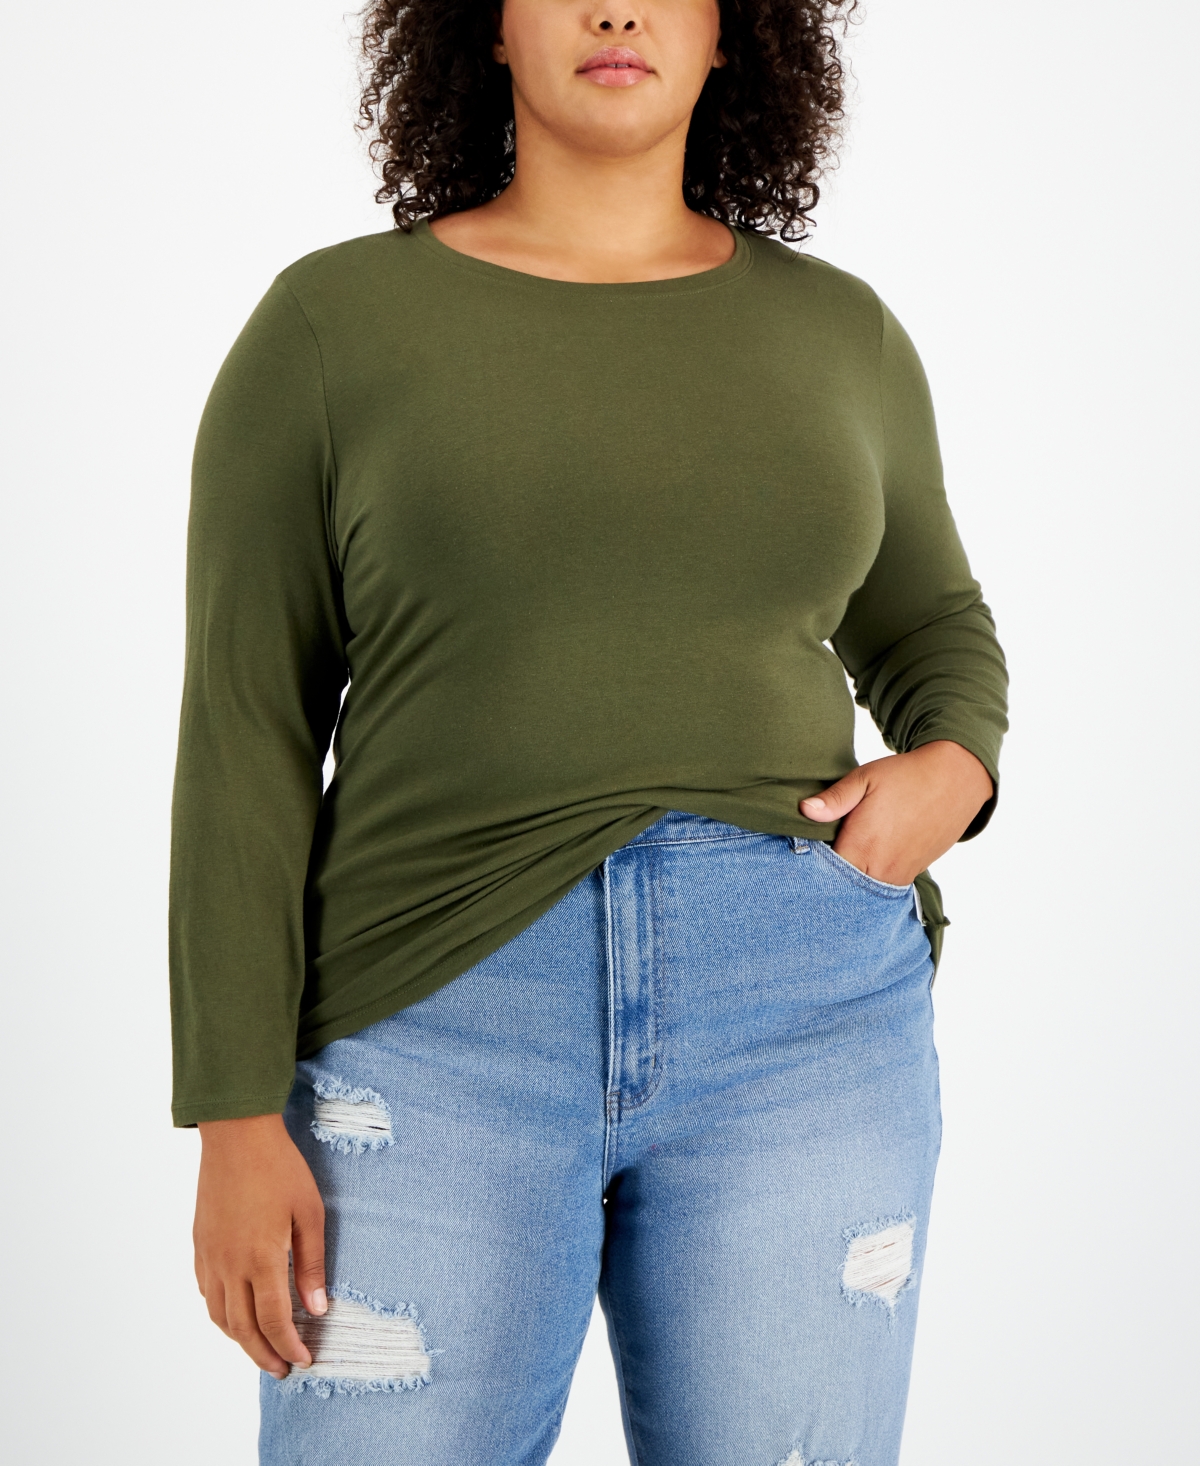 Aveto Plus Size Crewneck Top In Olive Night